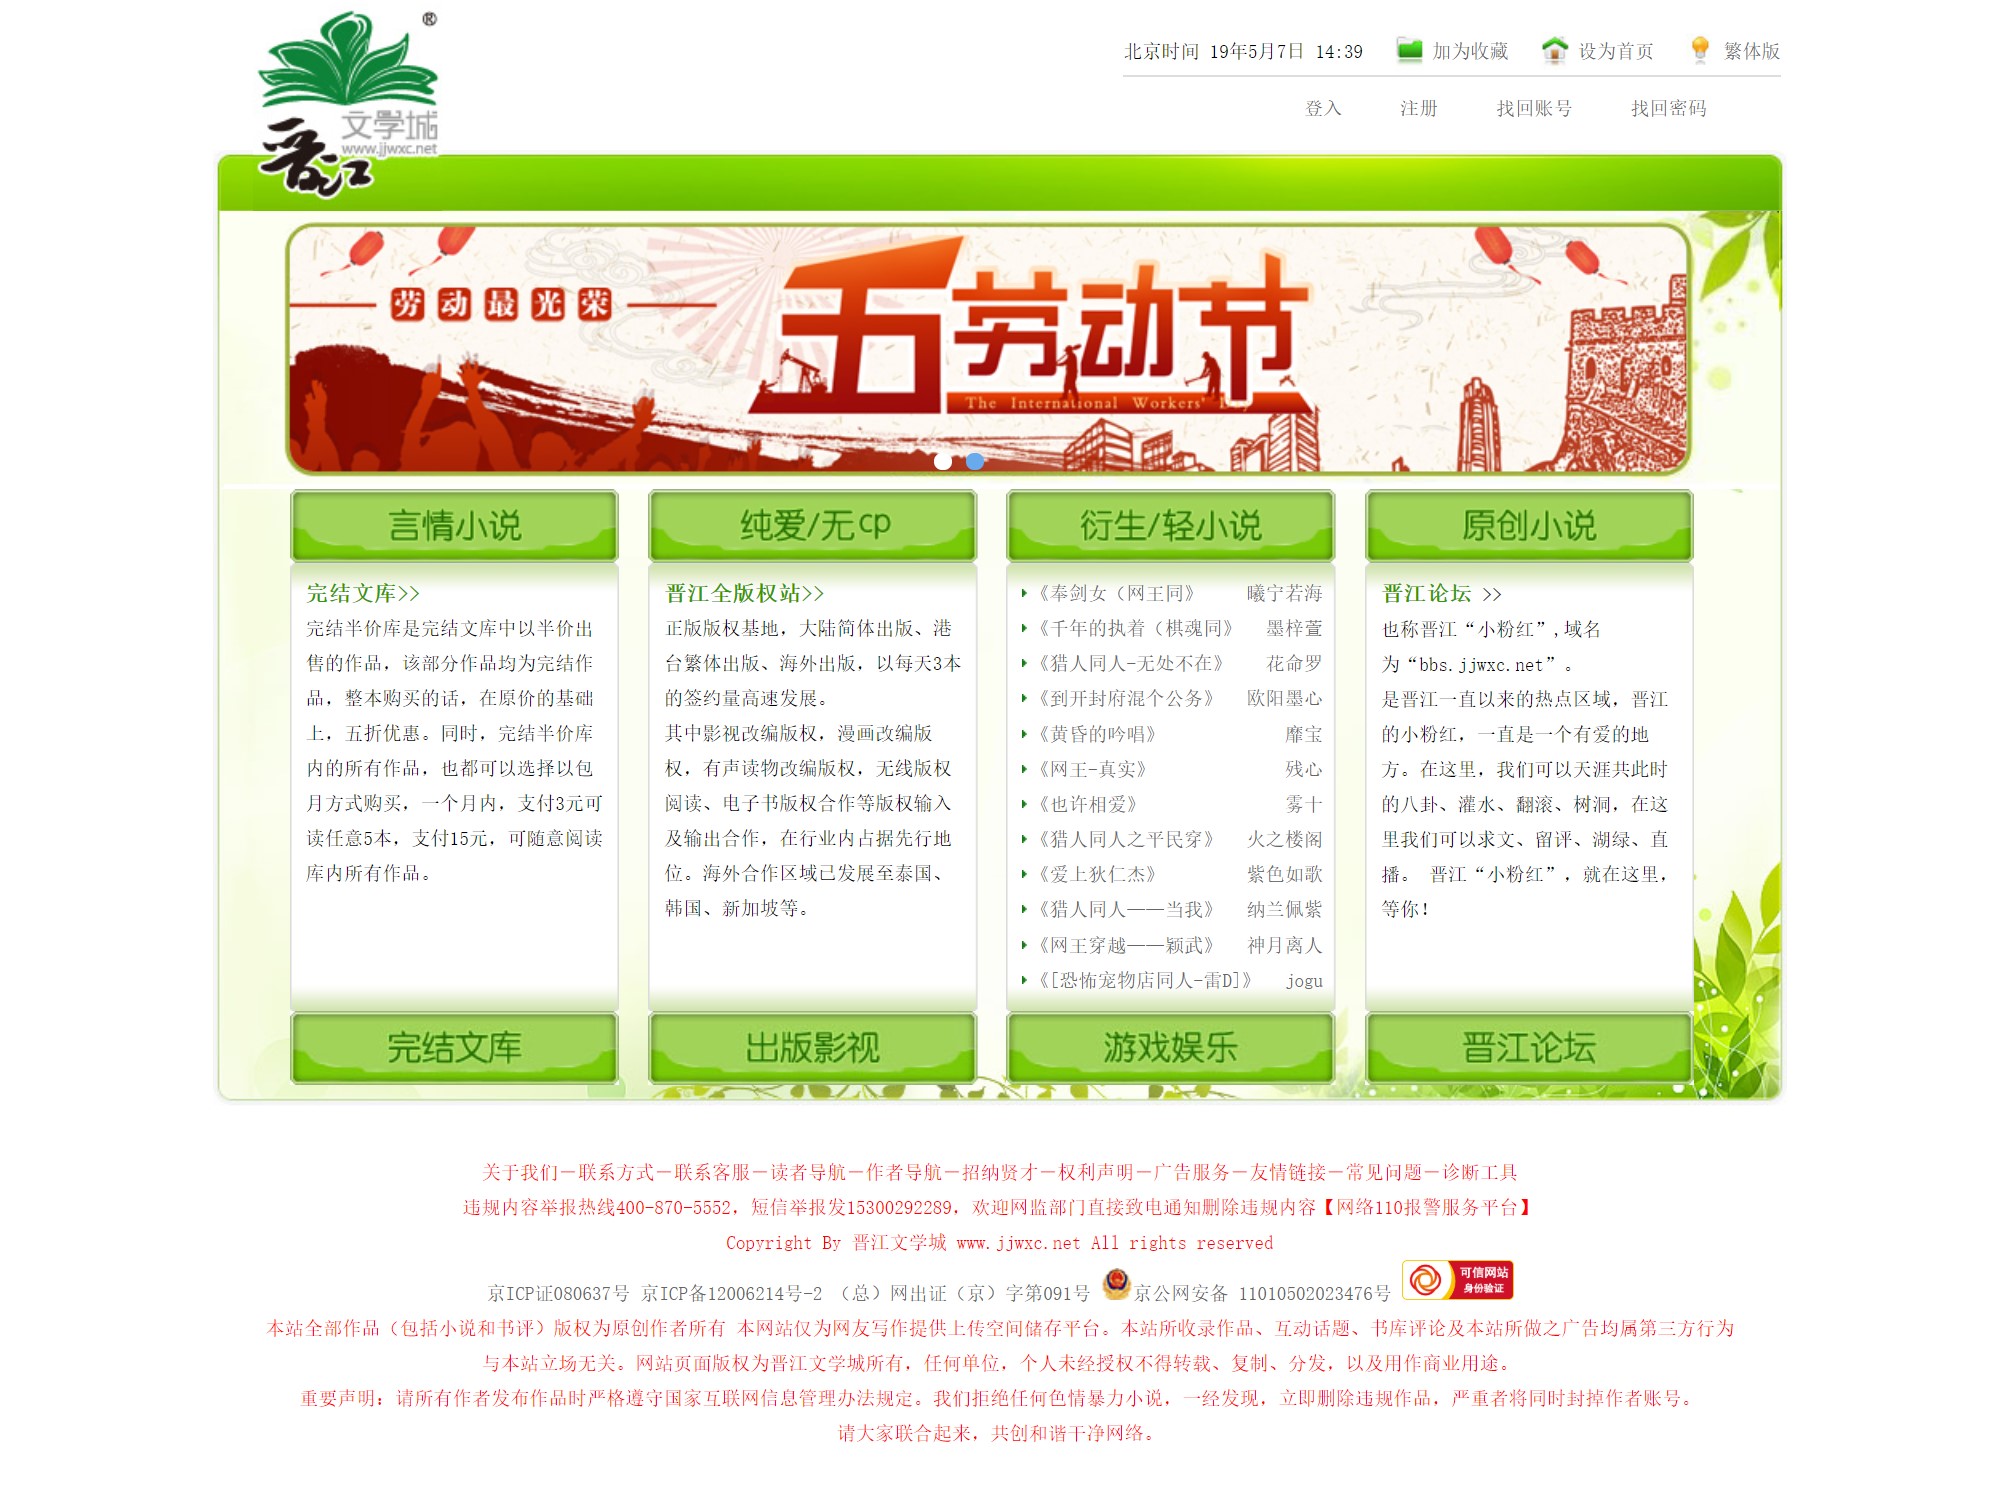 Screenshot of text-heavy Chinese-language website with main content divided into four columns—each of them having two buttons on its ends—indicating the site's eight channels. Red banner shows image of people cheering next to a cityscape that includes both modern buildings and a castle, with the website title in stylized Chinese characters, celebrating International Labor Day. Red text appears centered at the bottom of the page.